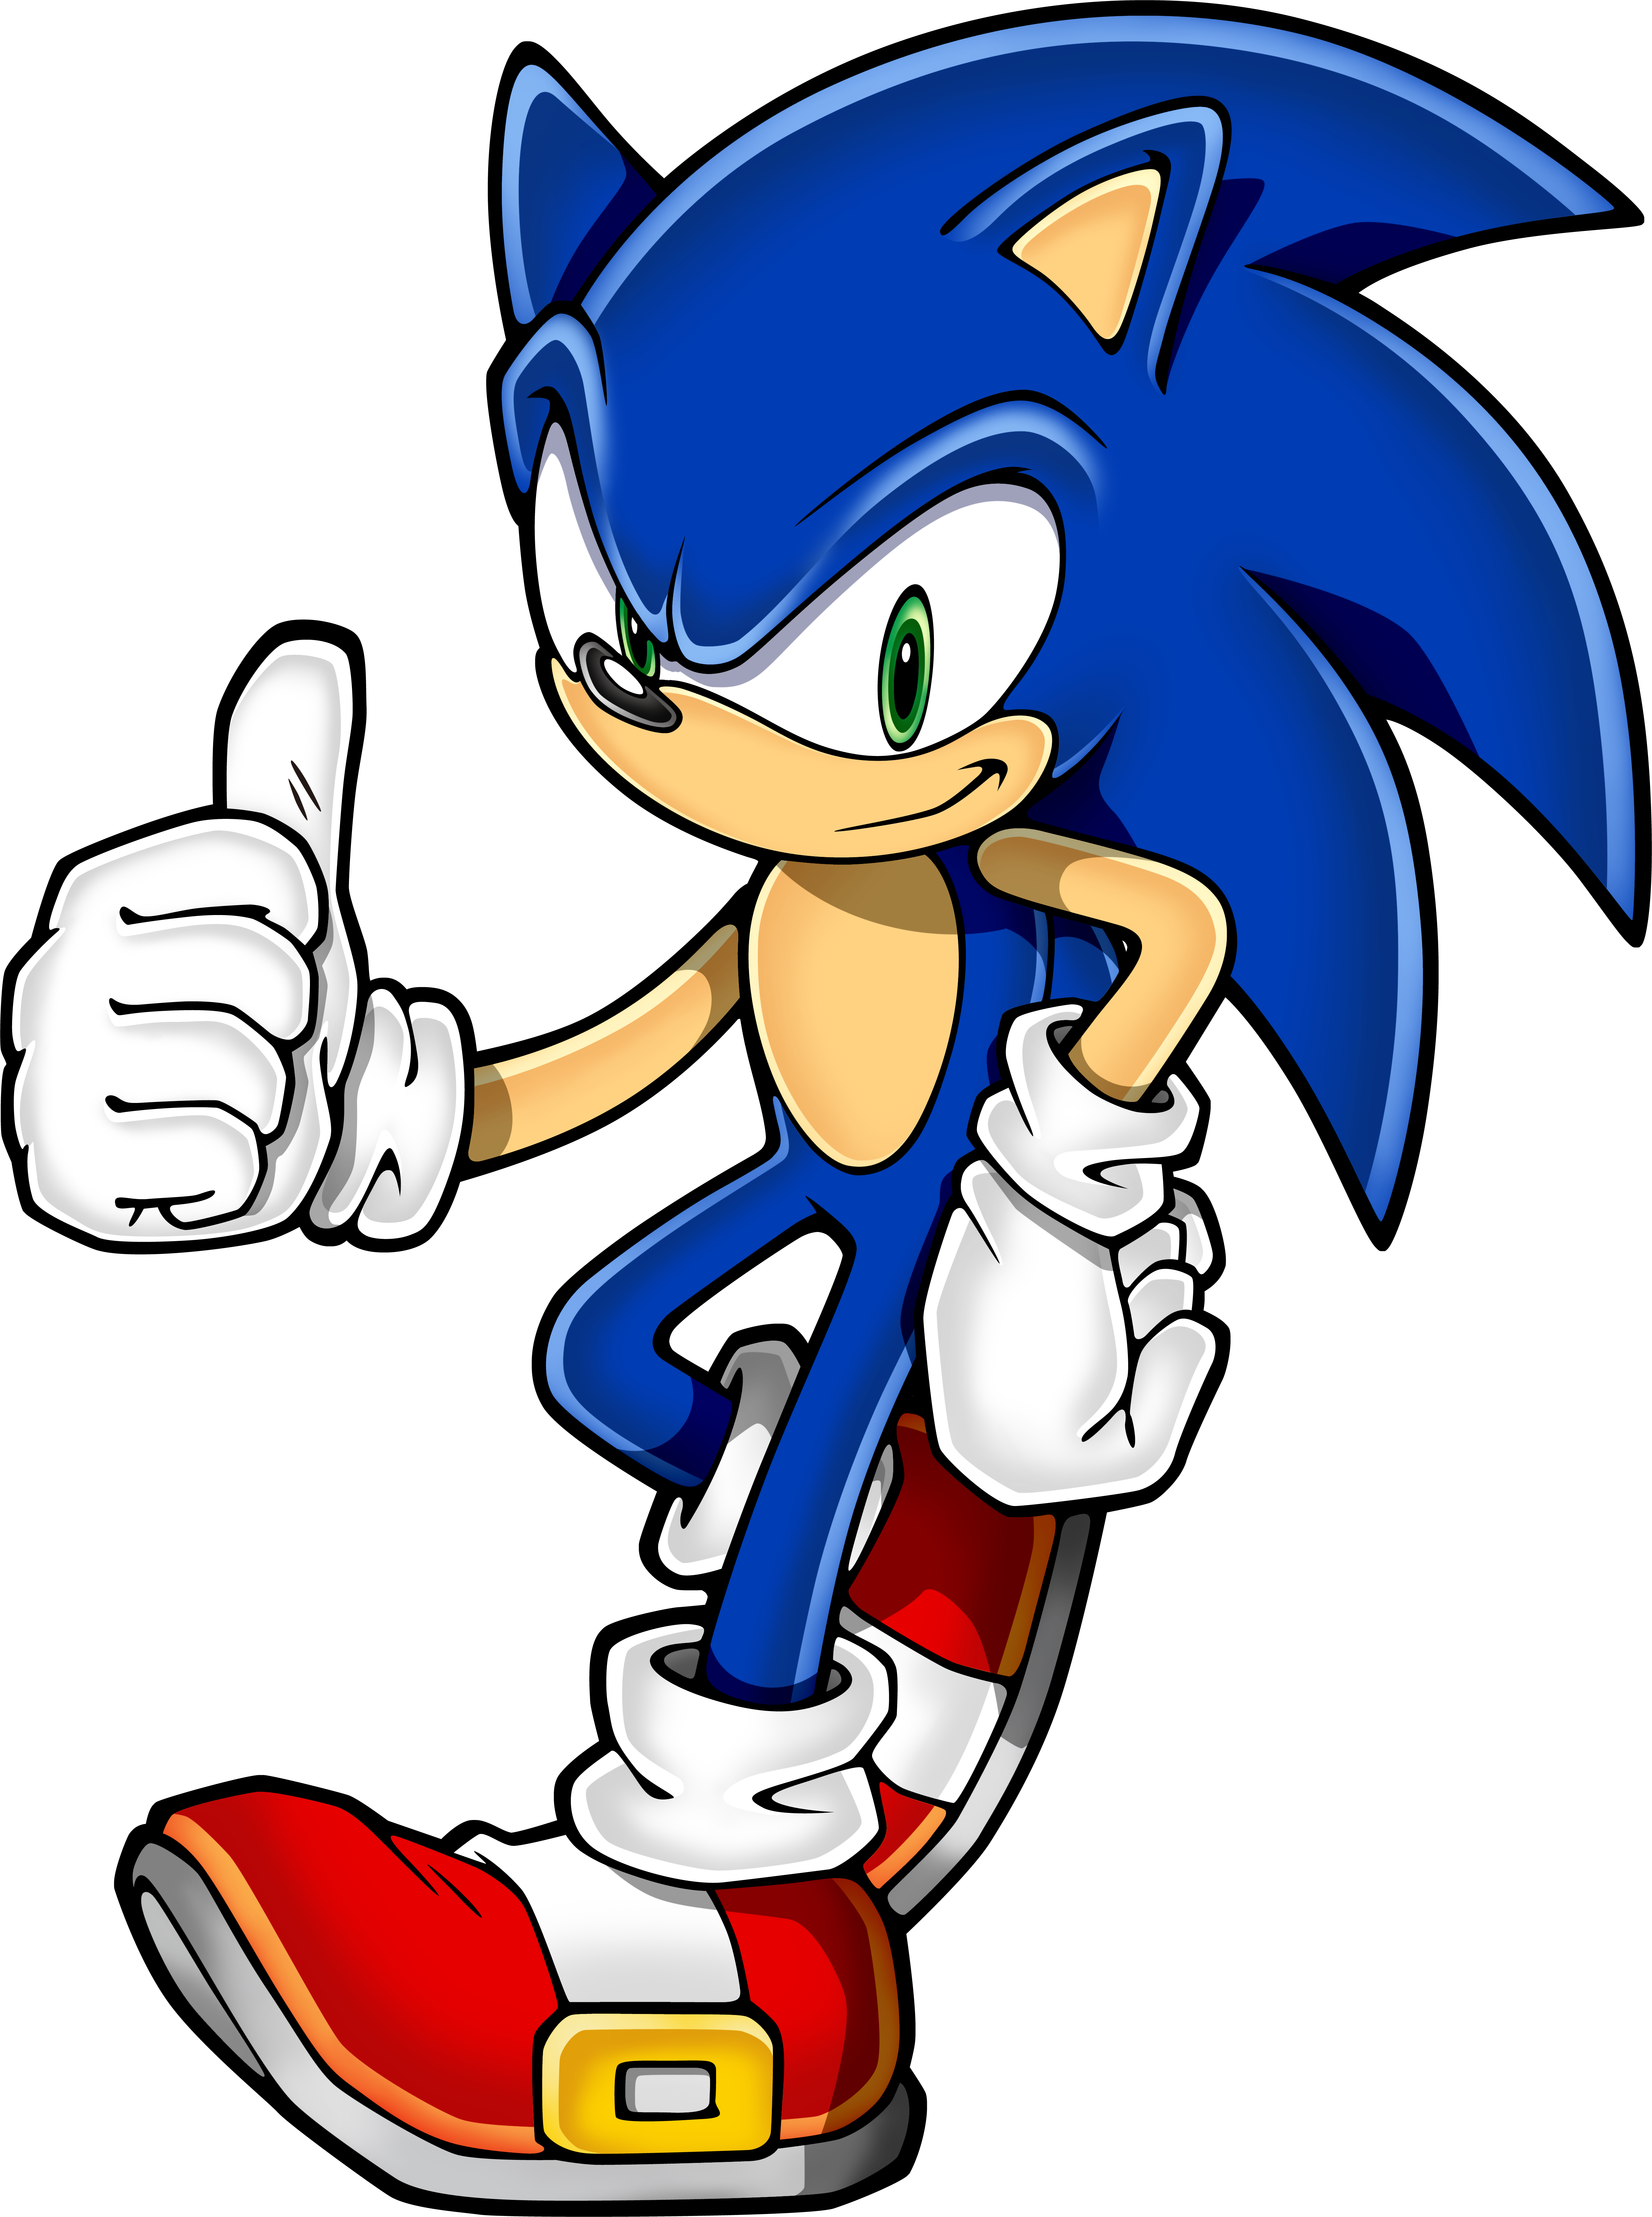 http://images1.wikia.nocookie.net/__cb20101018071756/sonic/images/3/31/Sonic_Art_Assets_DVD_-_Sonic_The_Hedgehog_-_6.png